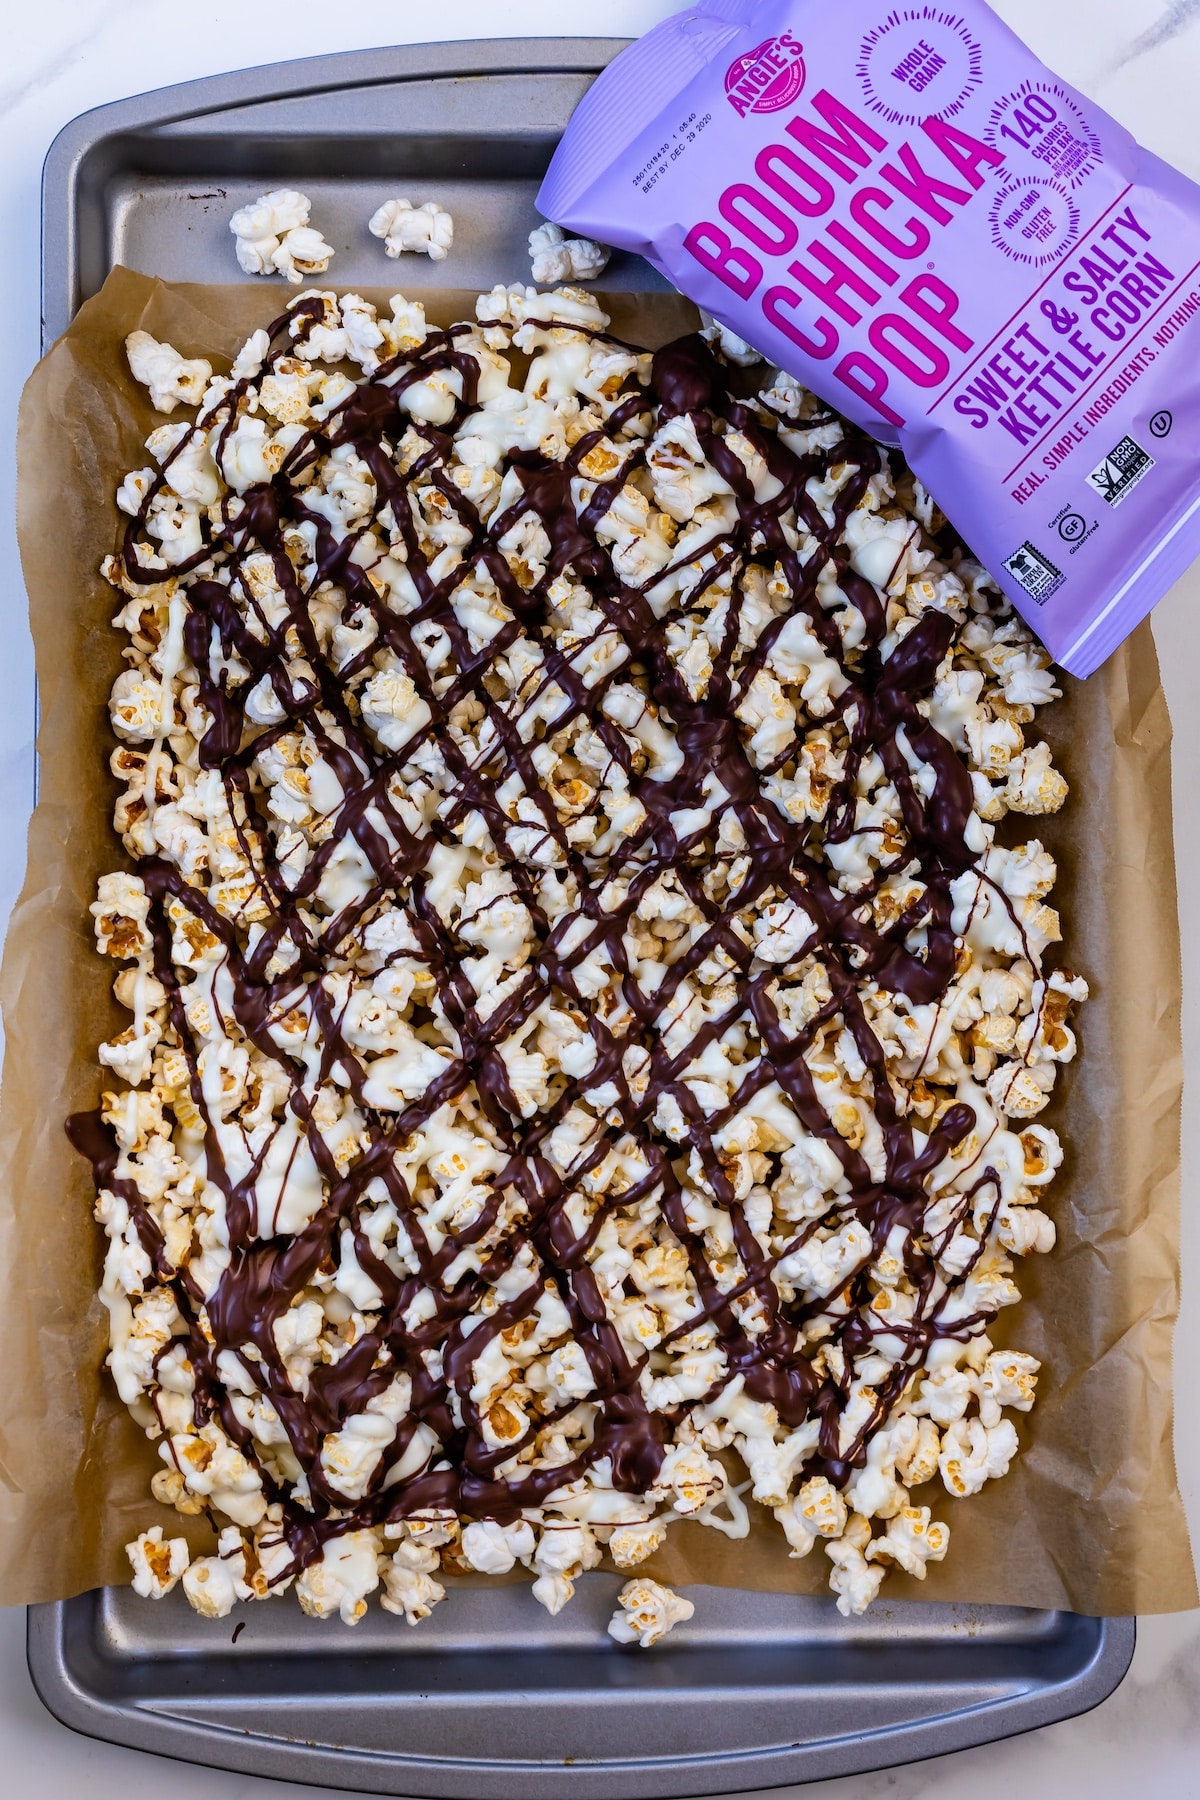 popcorn on a baking sheet covered in chocolate drizzle.